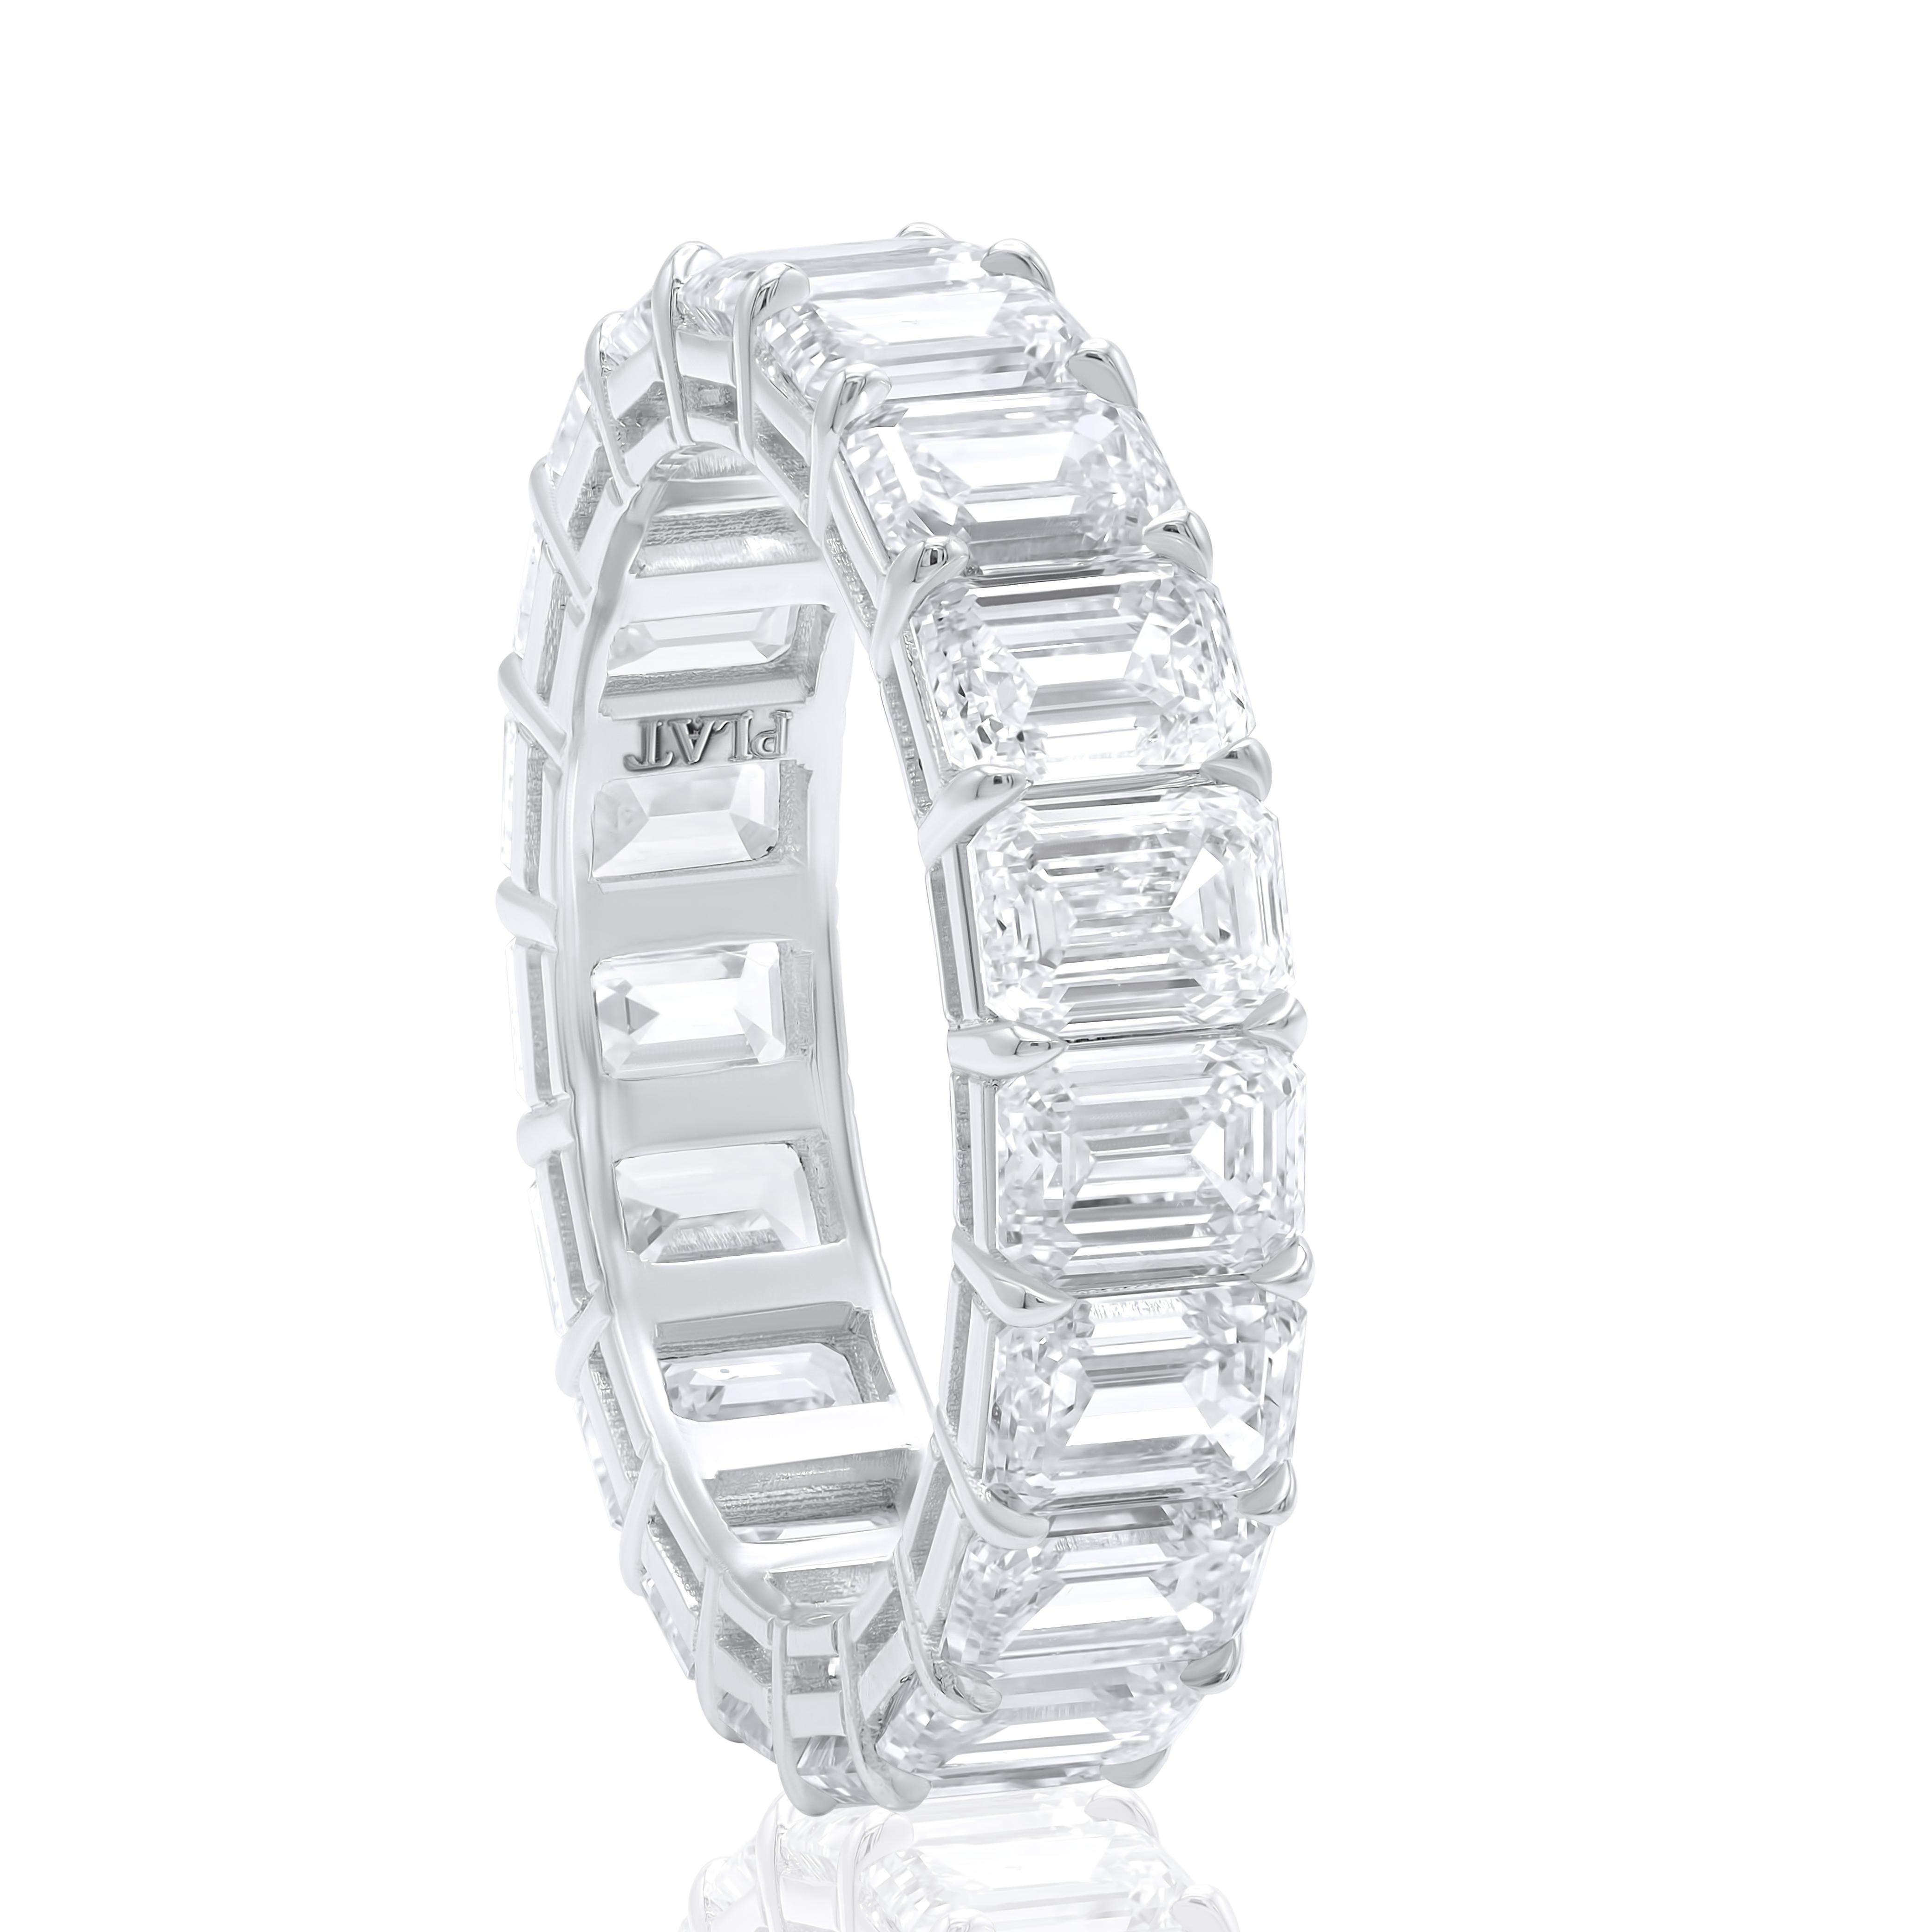 PLATINUM EMERALD CUT DIAMONDS ETERNITY BAND, FEATURES 11.34CTS OF TOTAL WEIGHT OF DIAMONDS.
Diana M. is a leading supplier of top-quality fine jewelry for over 35 years.
Diana M is one-stop shop for all your jewelry shopping, carrying line of